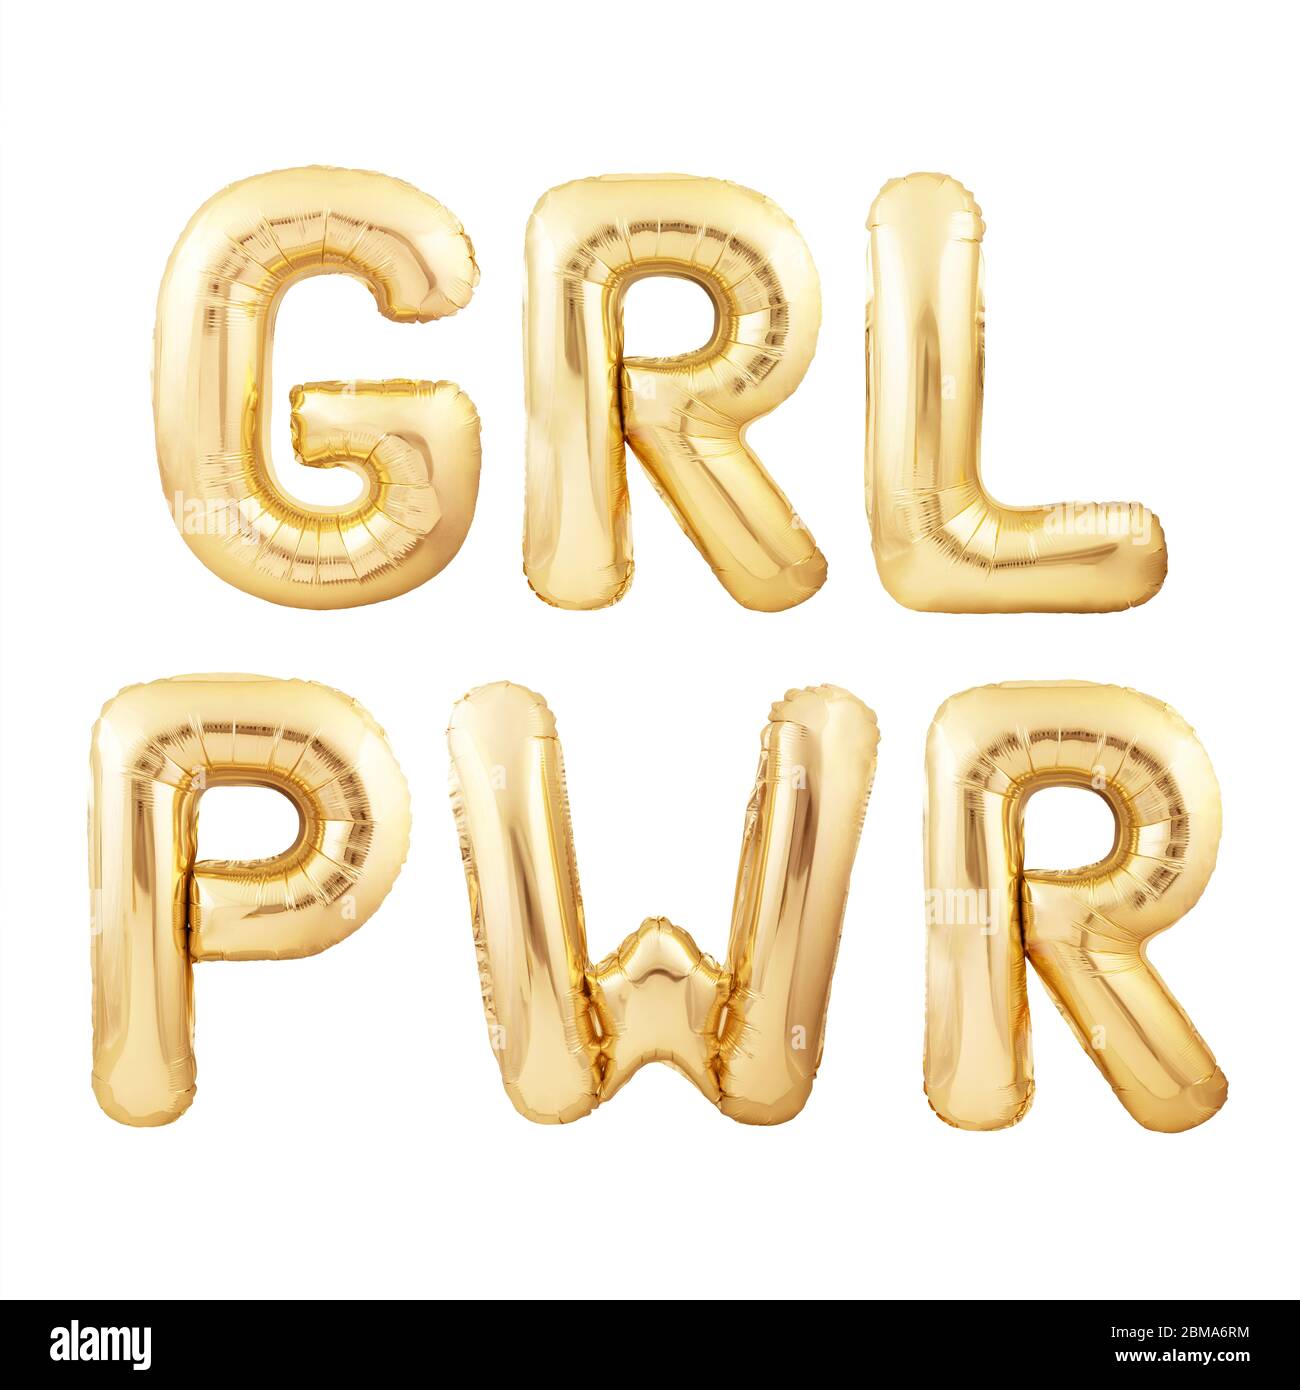 GRL PWR abbreviation for GIRL POWER quote made of golden inflatable balloon letters isolated on white background Stock Photo